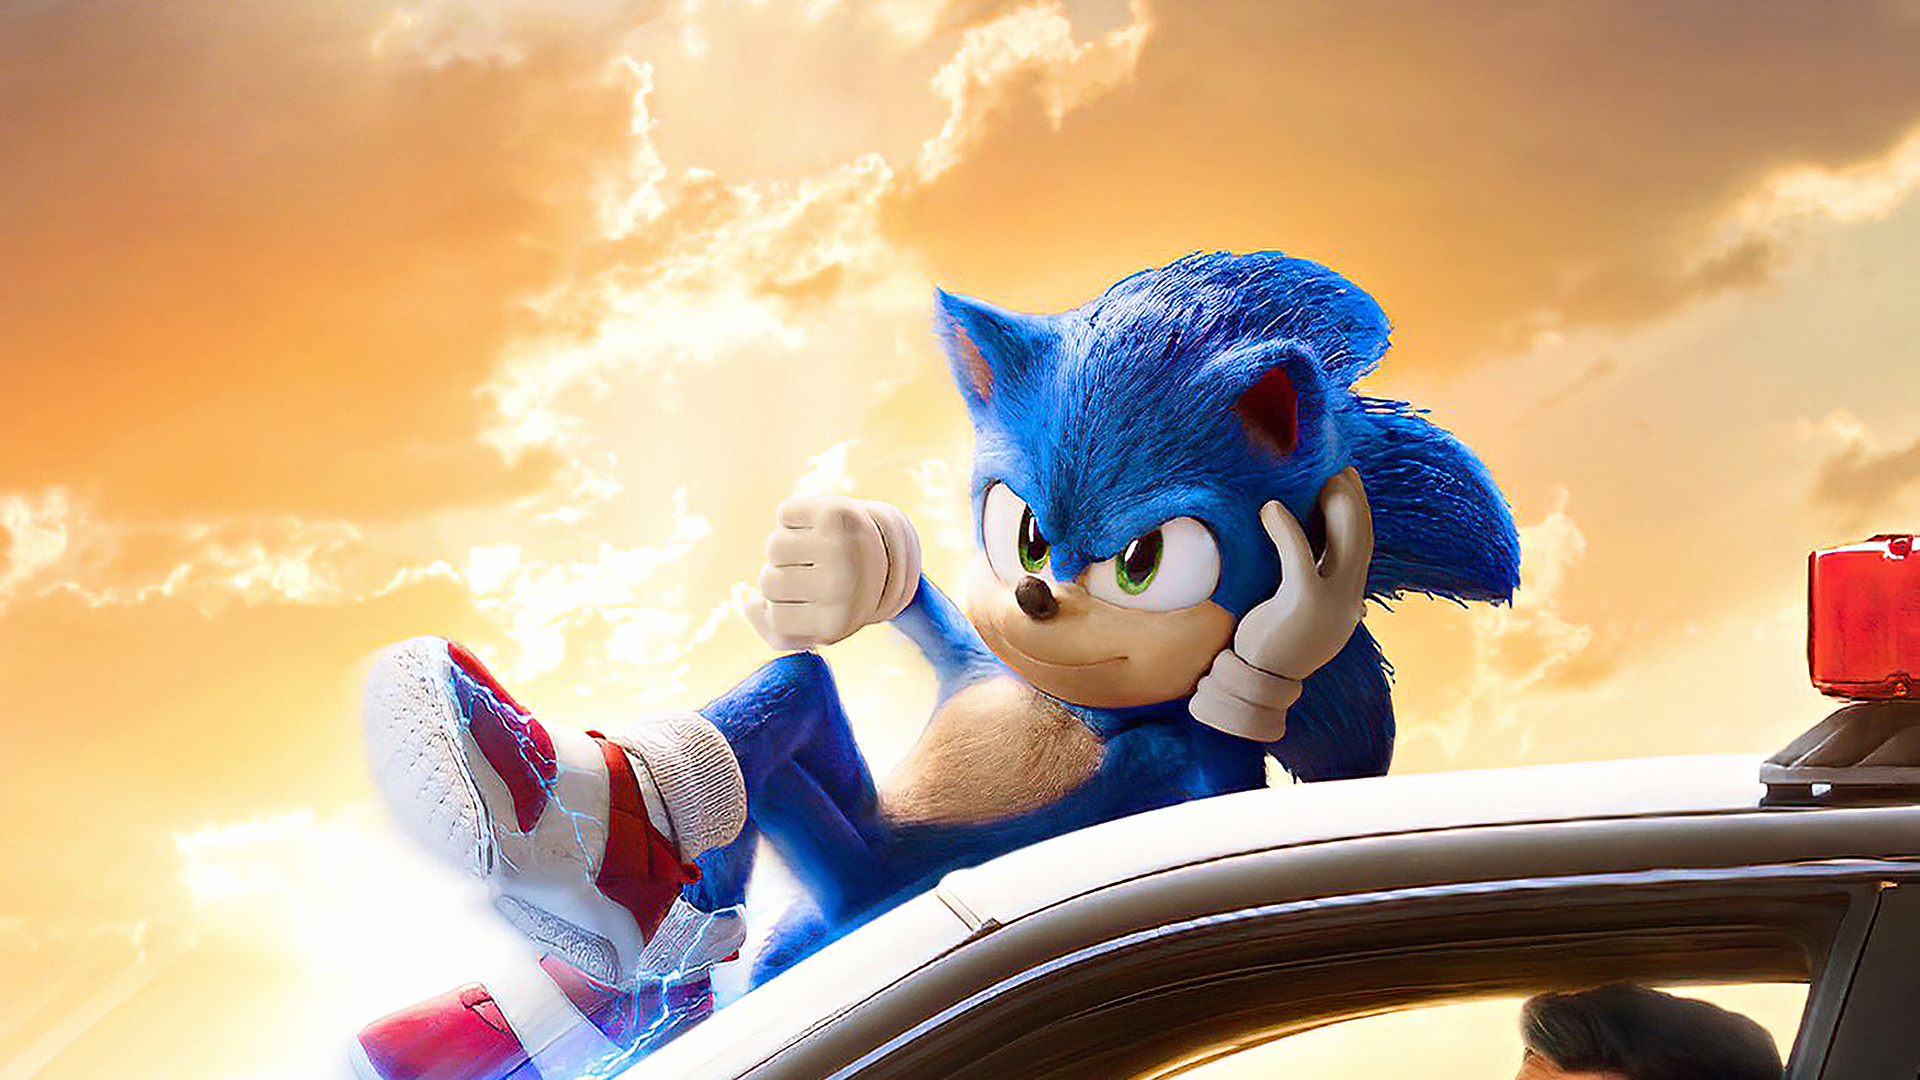 X sonic the hedgehog laptop full hd p hd k wallpapers images backgrounds photos and pictures